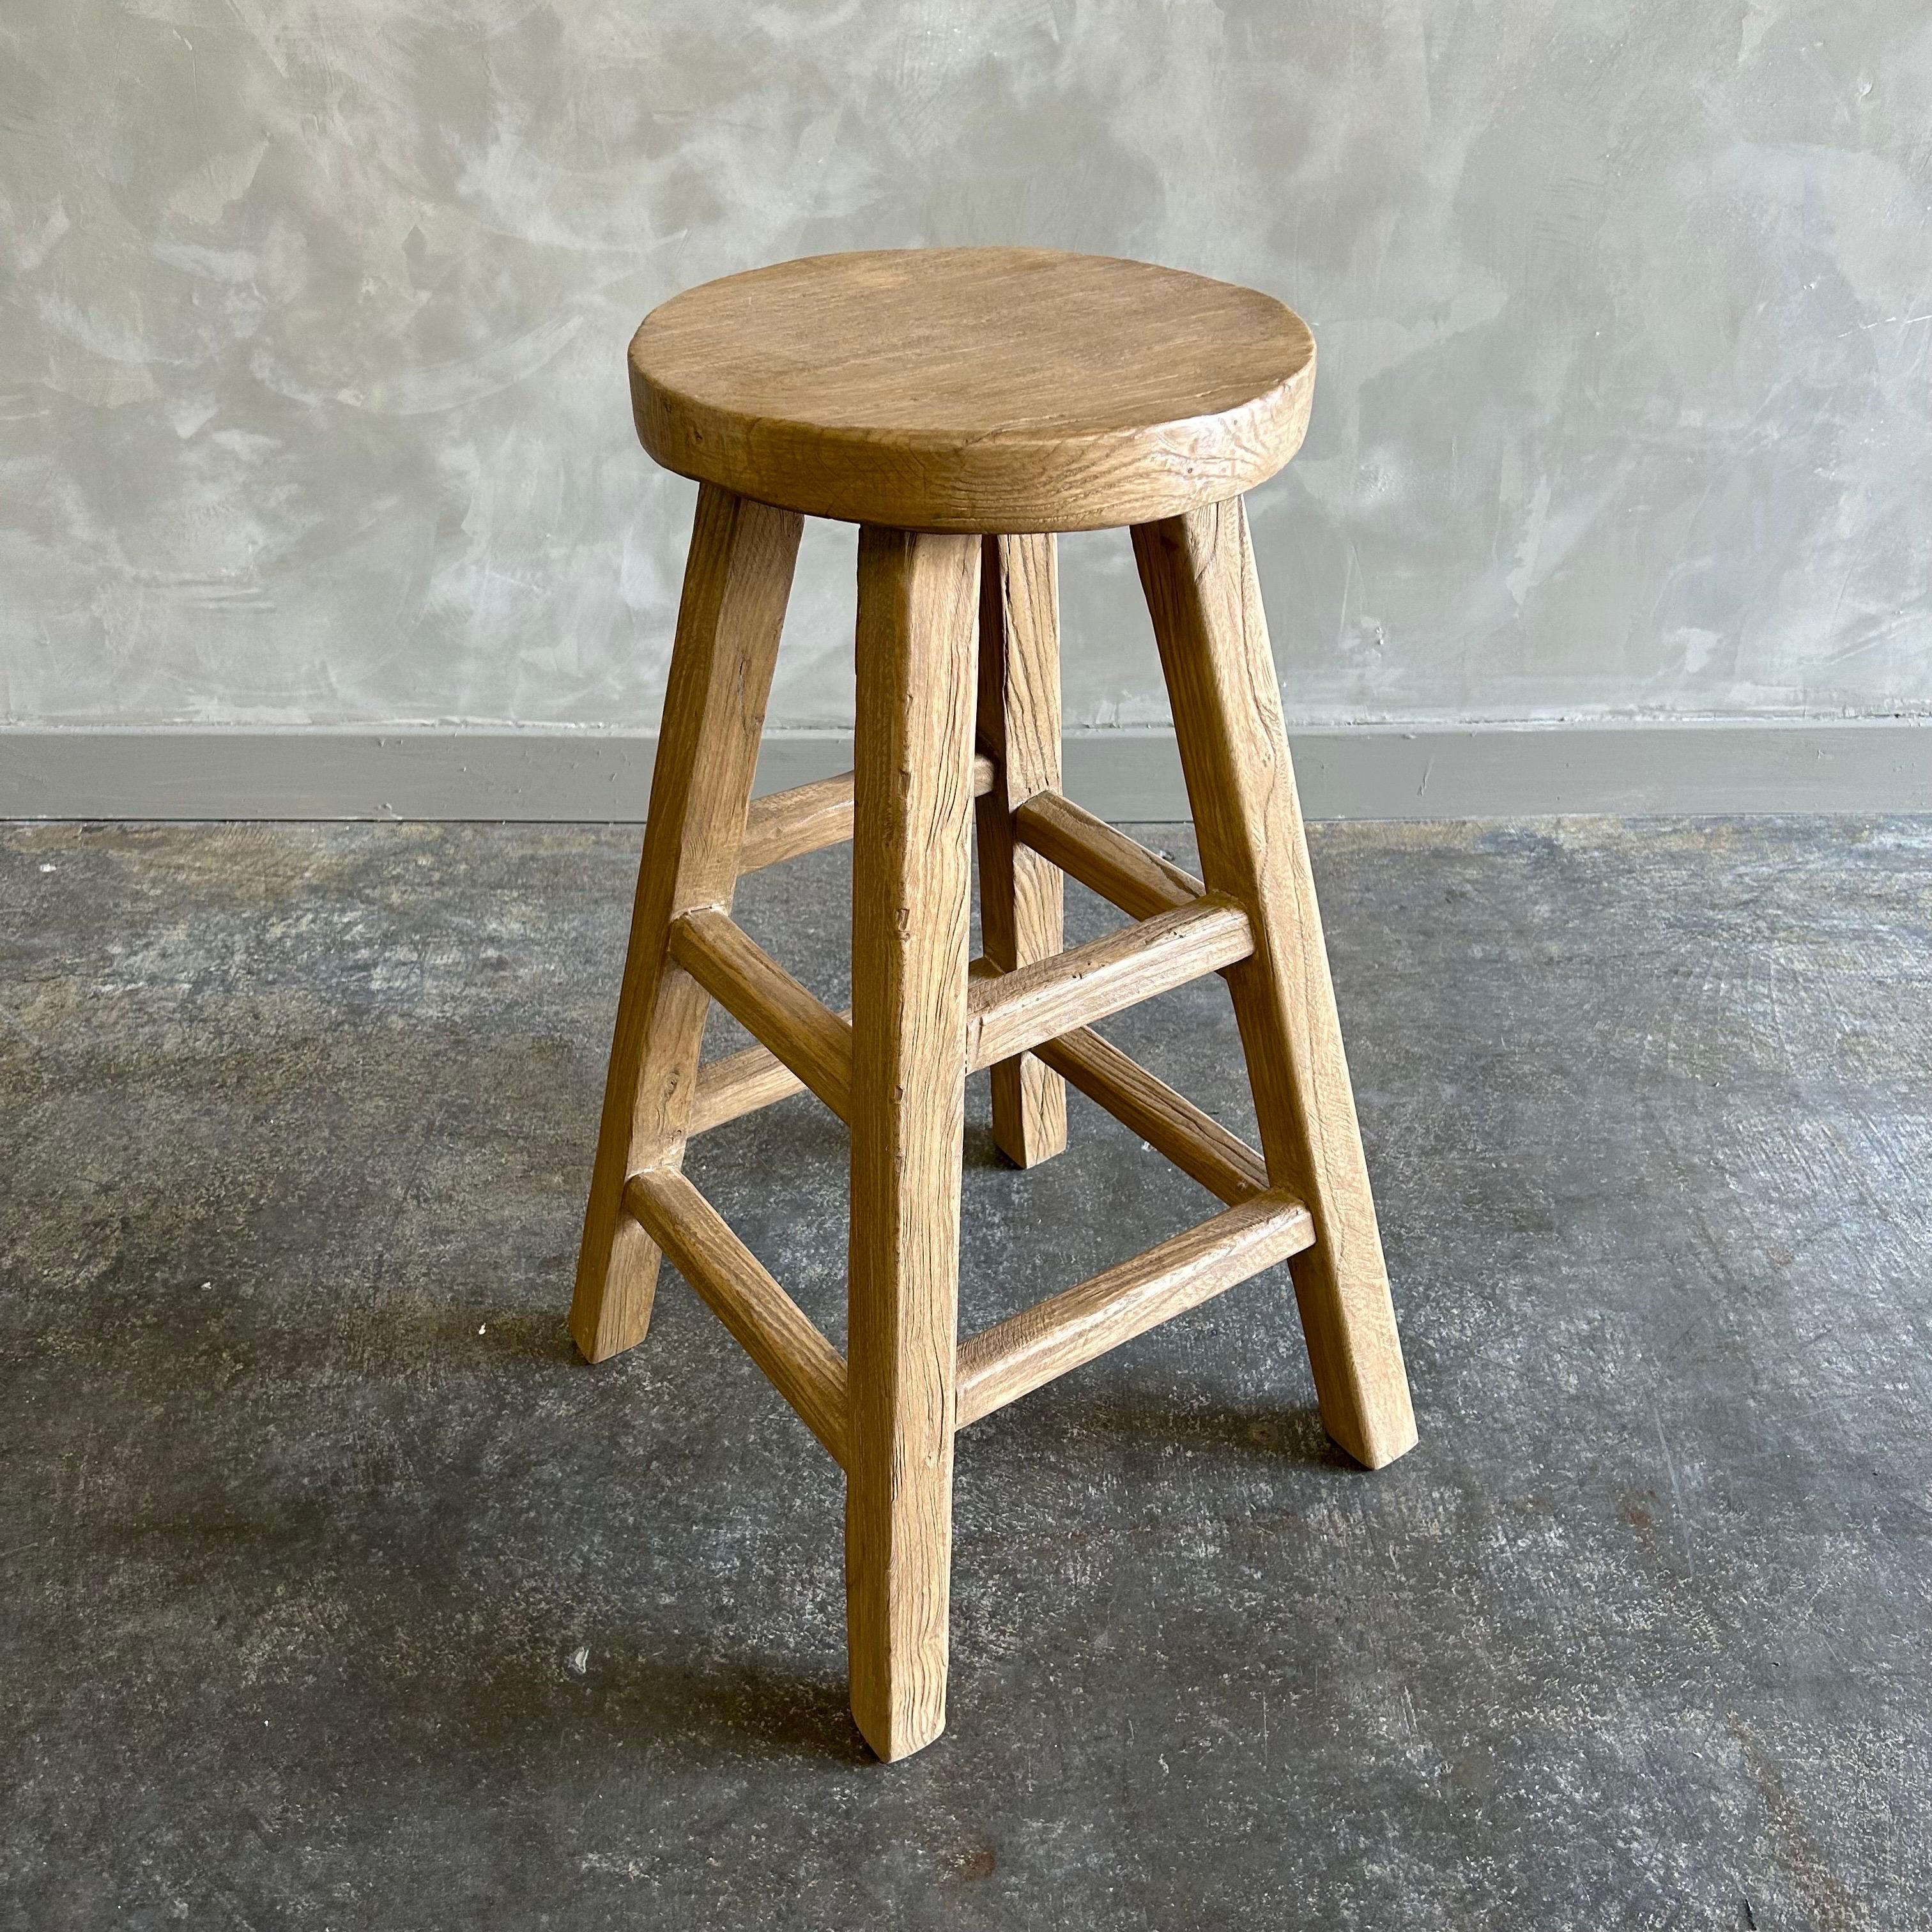 Bloom Home inc has over 2000 items in stock ready for immediate shipping, scroll down to view all of our items!
Elm Wood Counter Stool
counter stool 15”w x 15”d x 26”h
Seat: 12”rd.
Beautiful antique patina, with weathering and age, these are